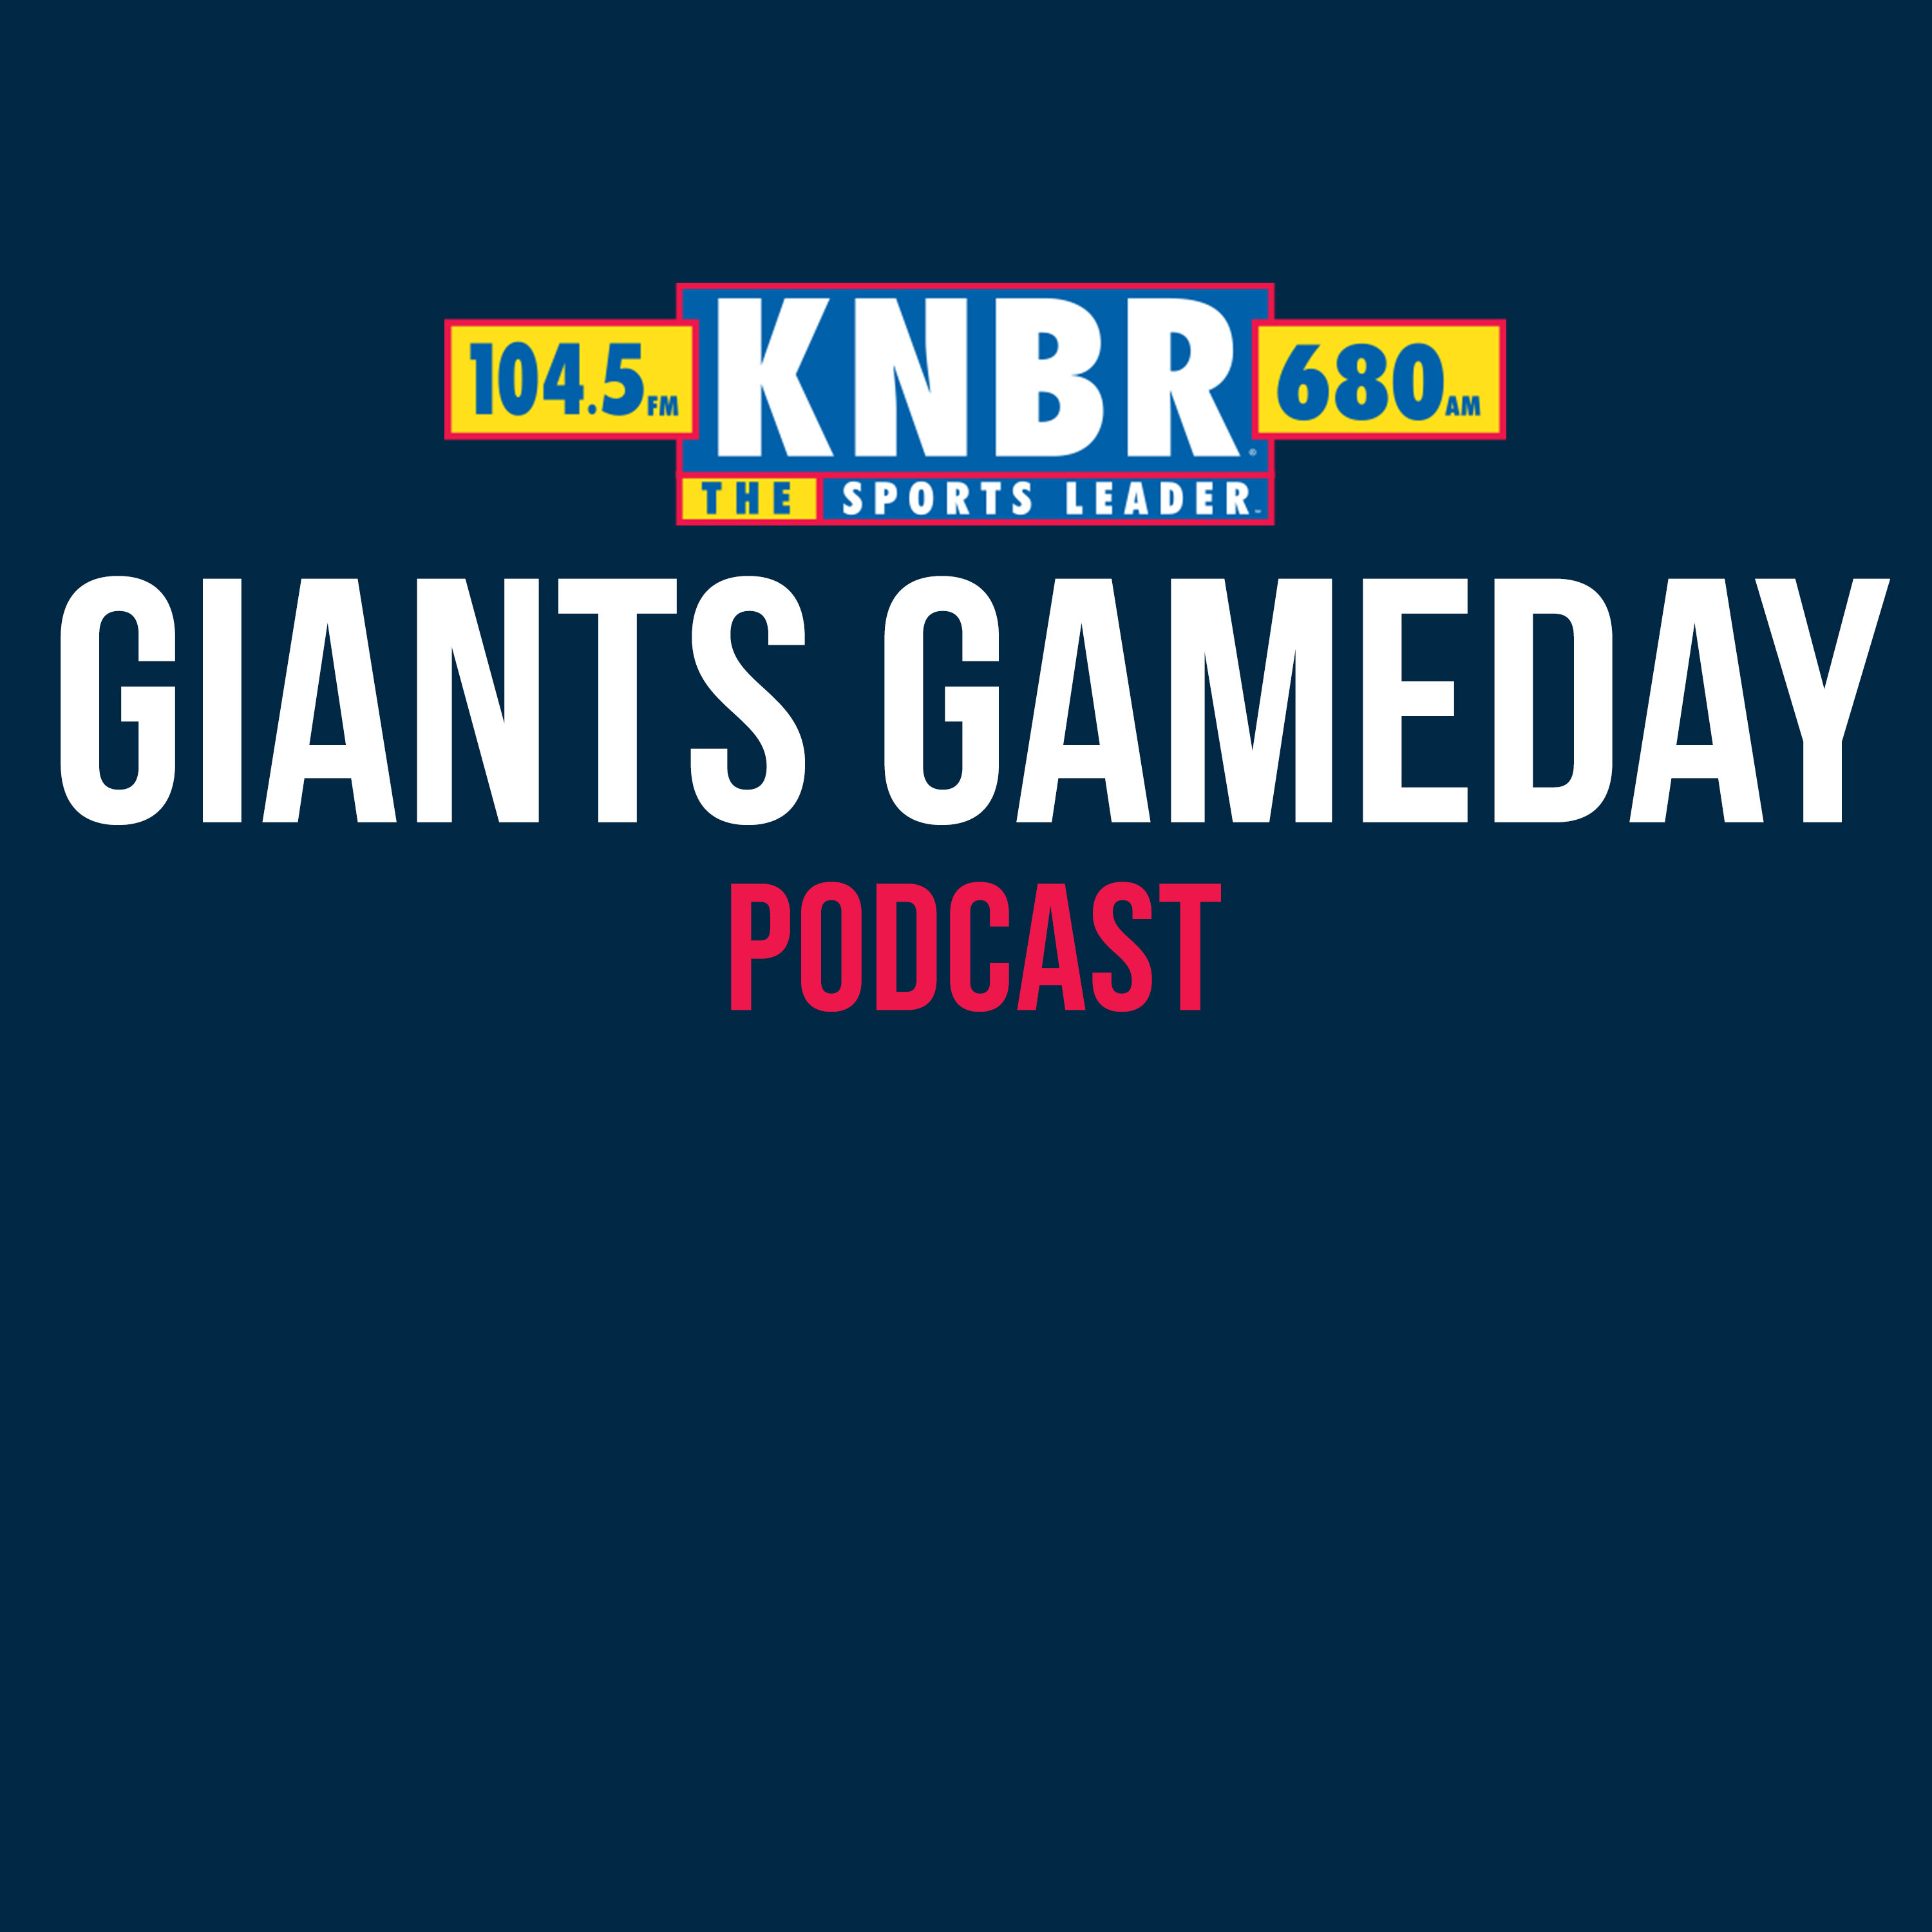 Giants Gameday podcast